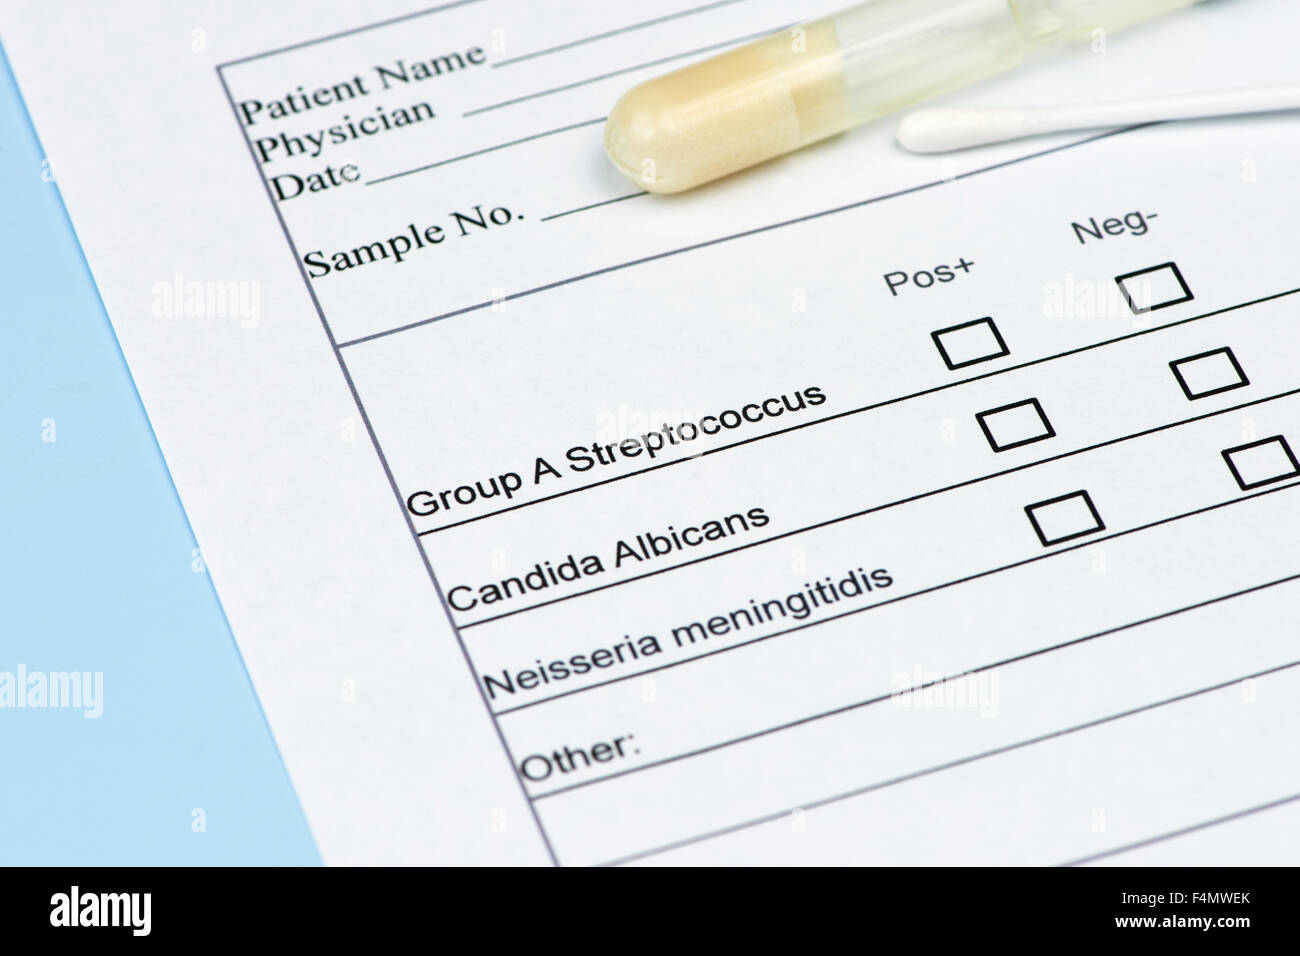 Diagnostic culture swab and holder with streptococcus group A check box. Stock Photo